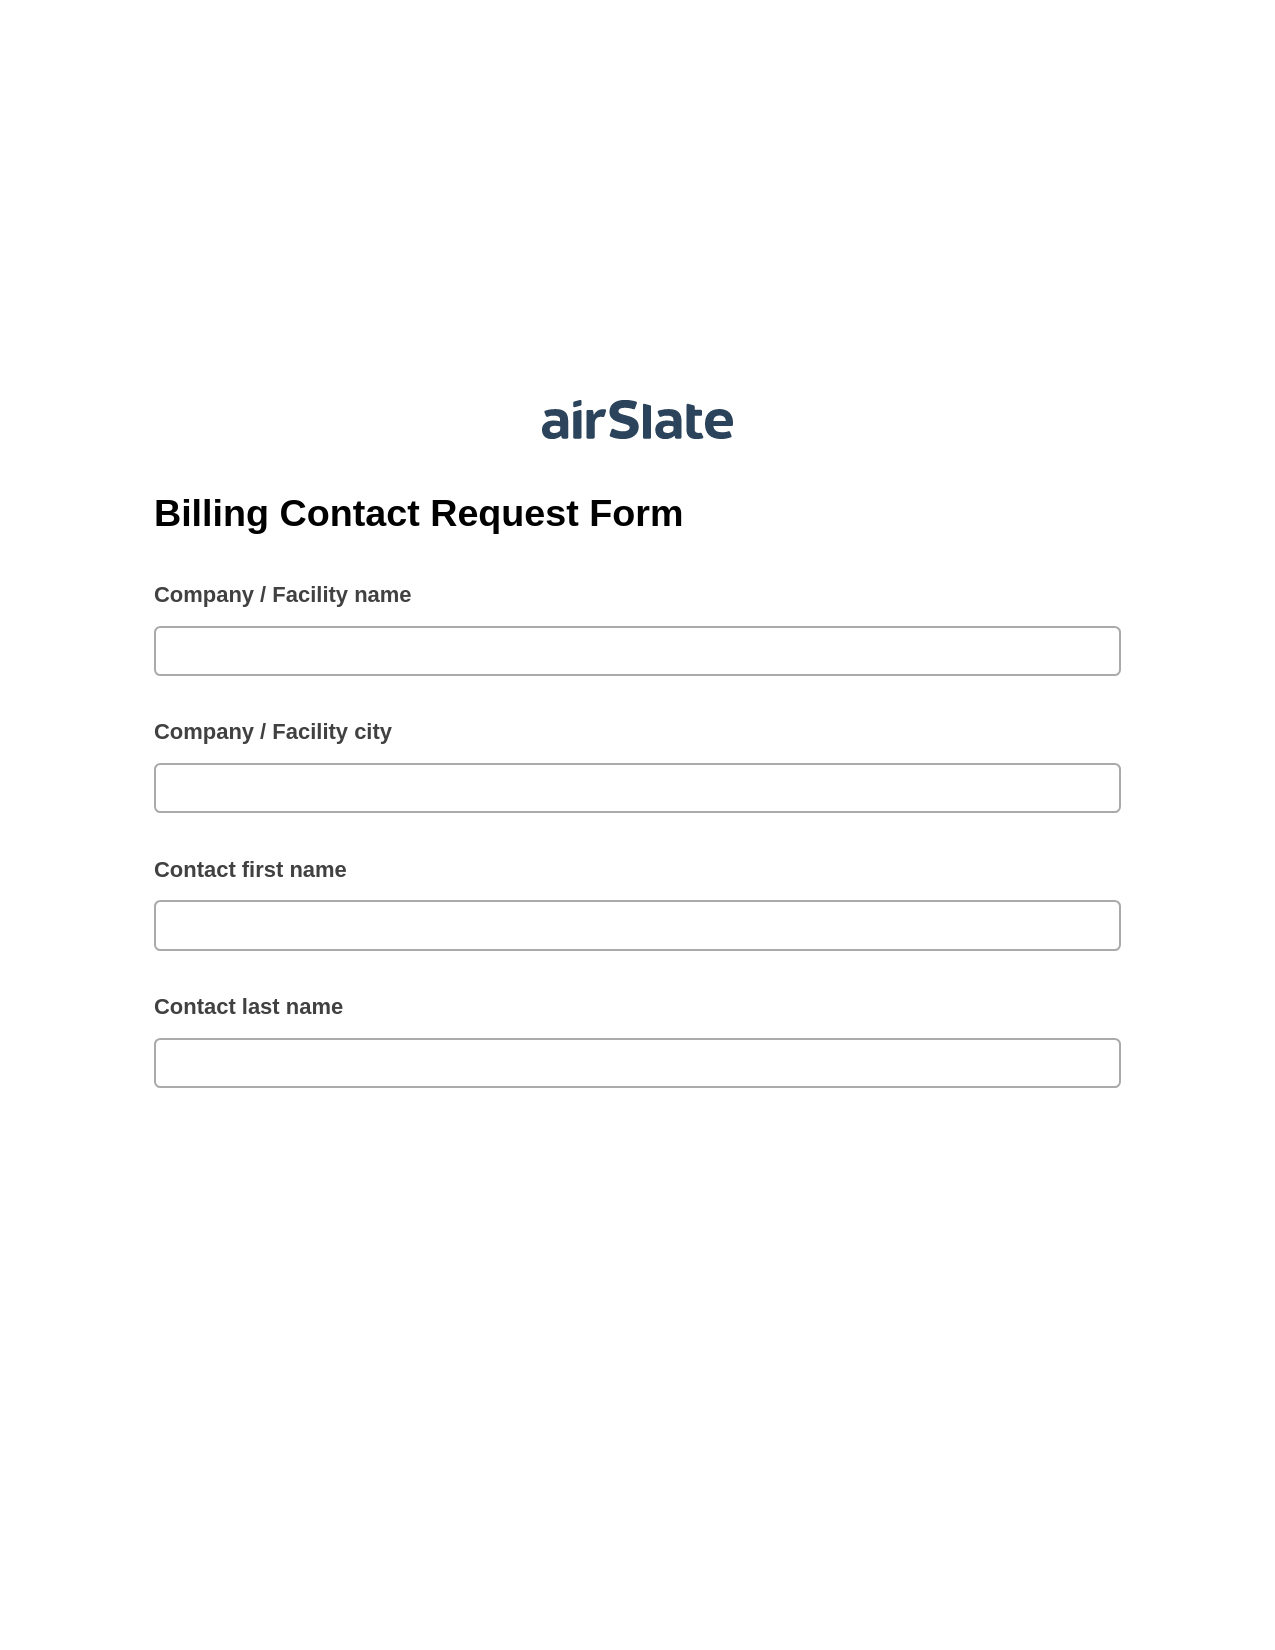 Multirole Billing Contact Request Form Pre-fill Slate from MS Dynamics 365 Records Bot, Slack Notification Bot, Google Drive Bot